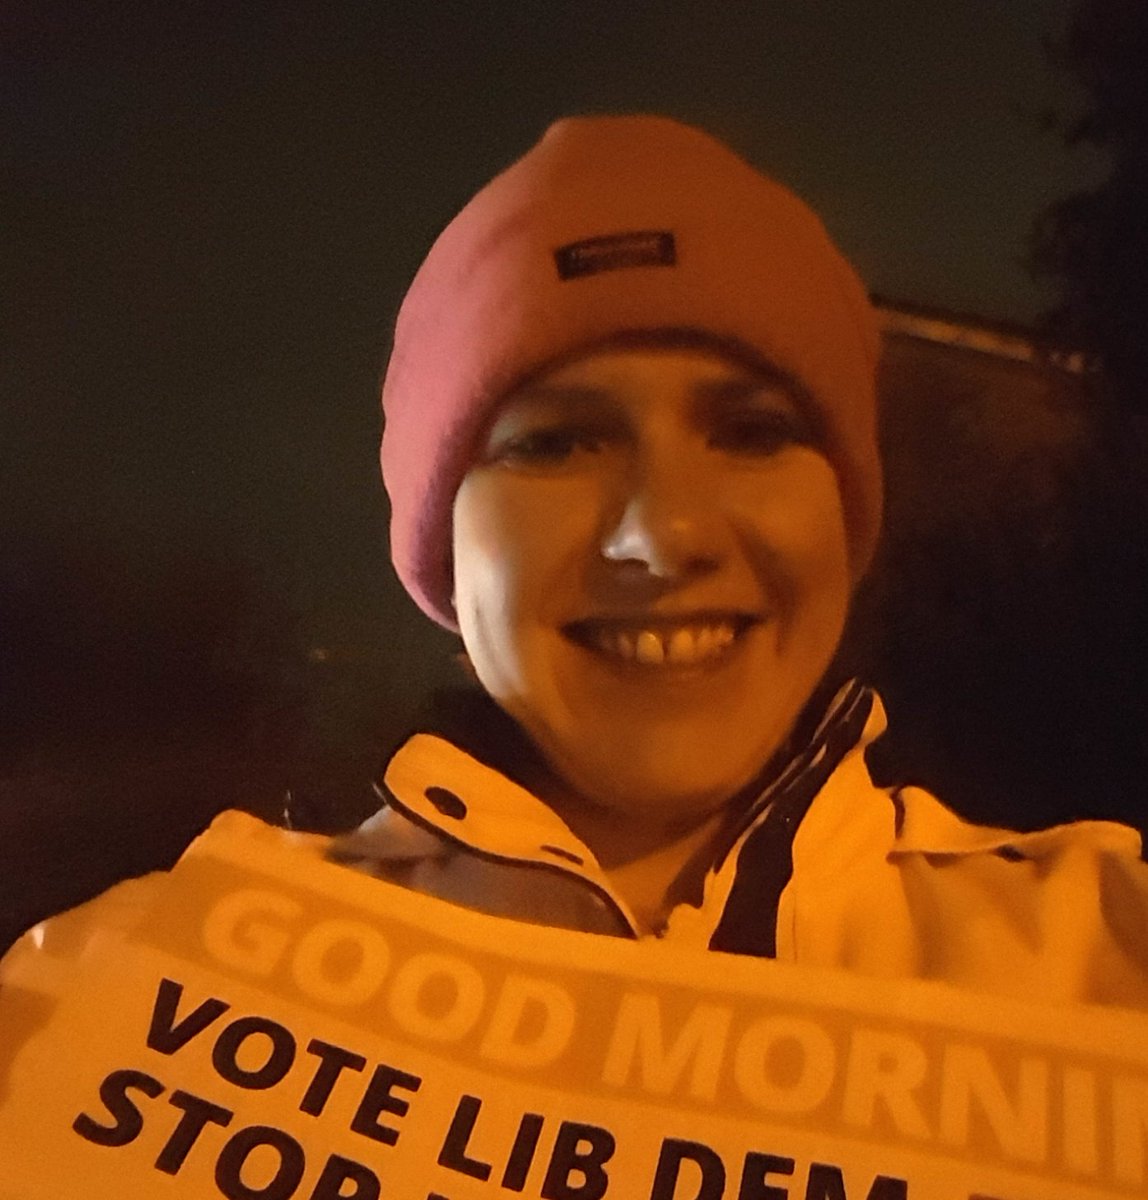 Good Morning! 

Today is #GeneralElection2019 polling day!

#VoteLibDem to #StopBorisJohnson and #StopBrexit